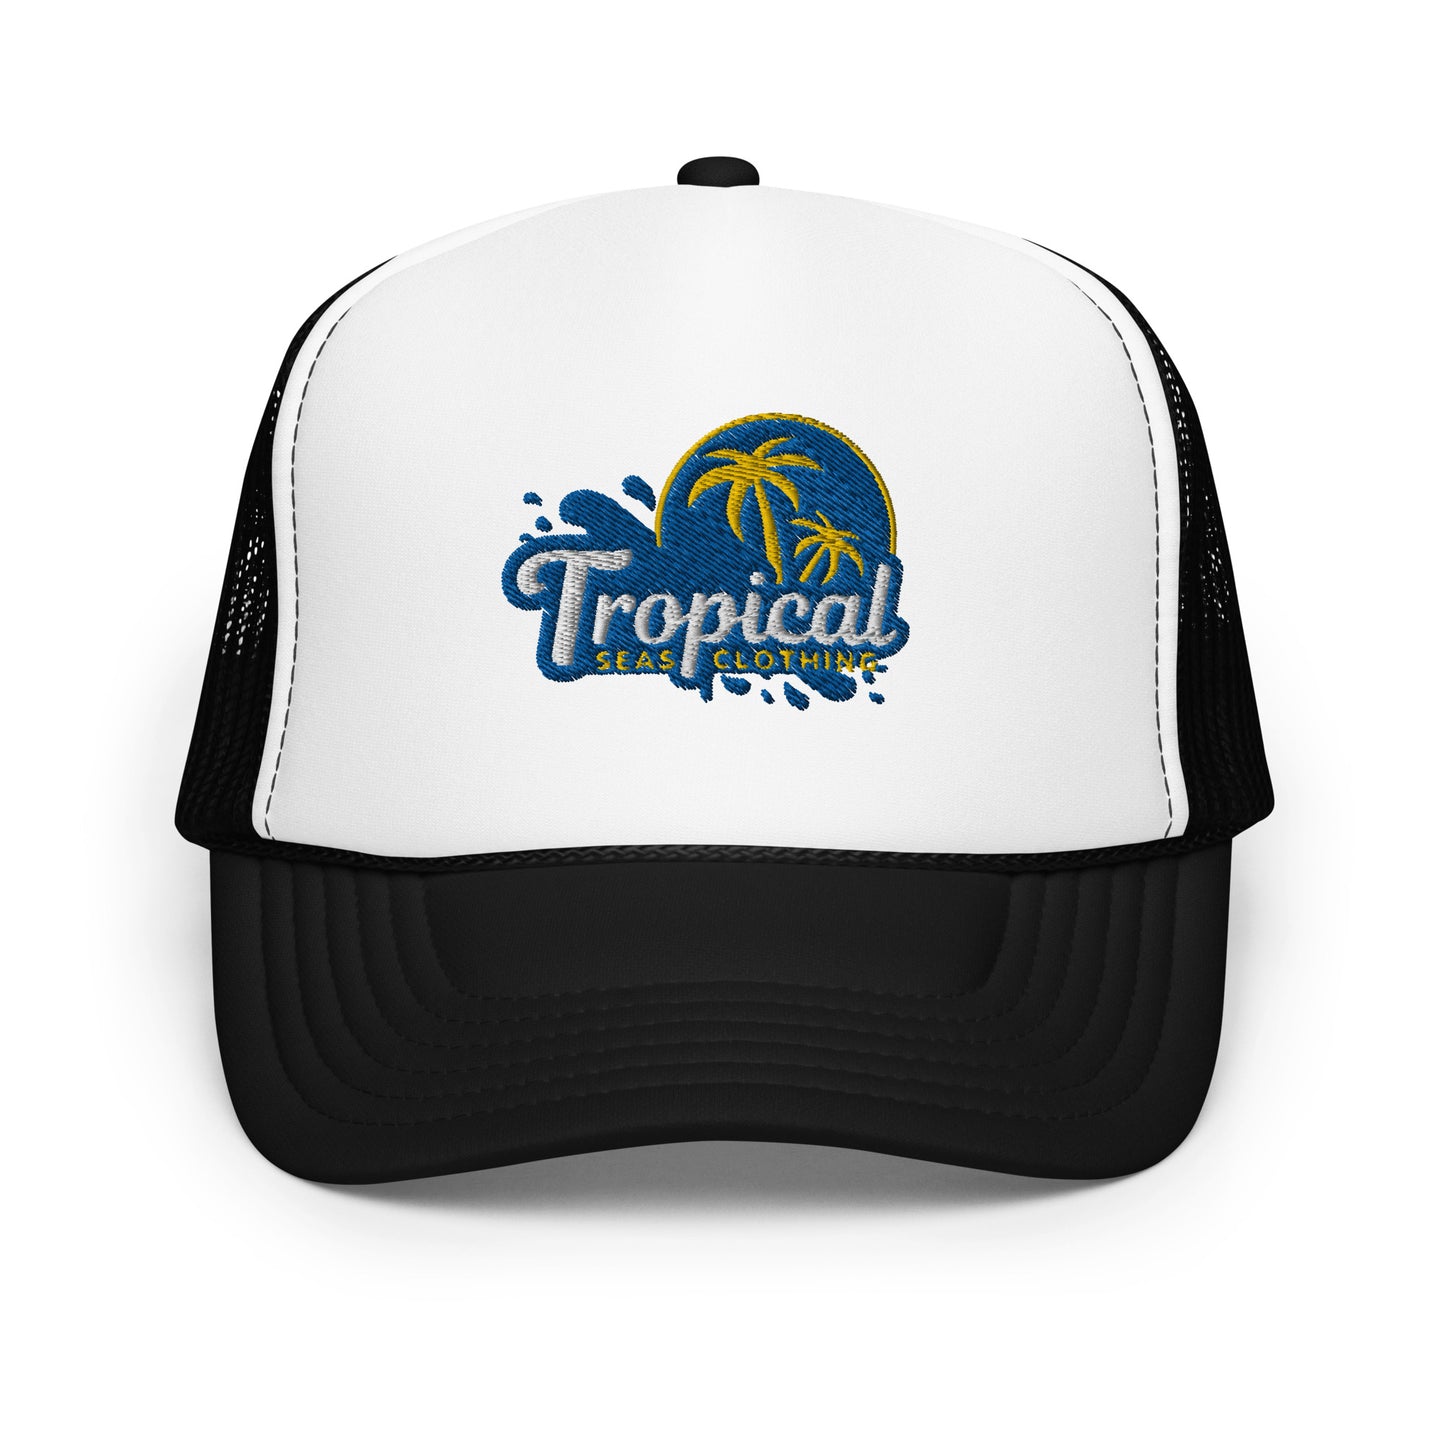 Tropical Tides Foam Trucker Hat: Ride the Waves of Fashion!